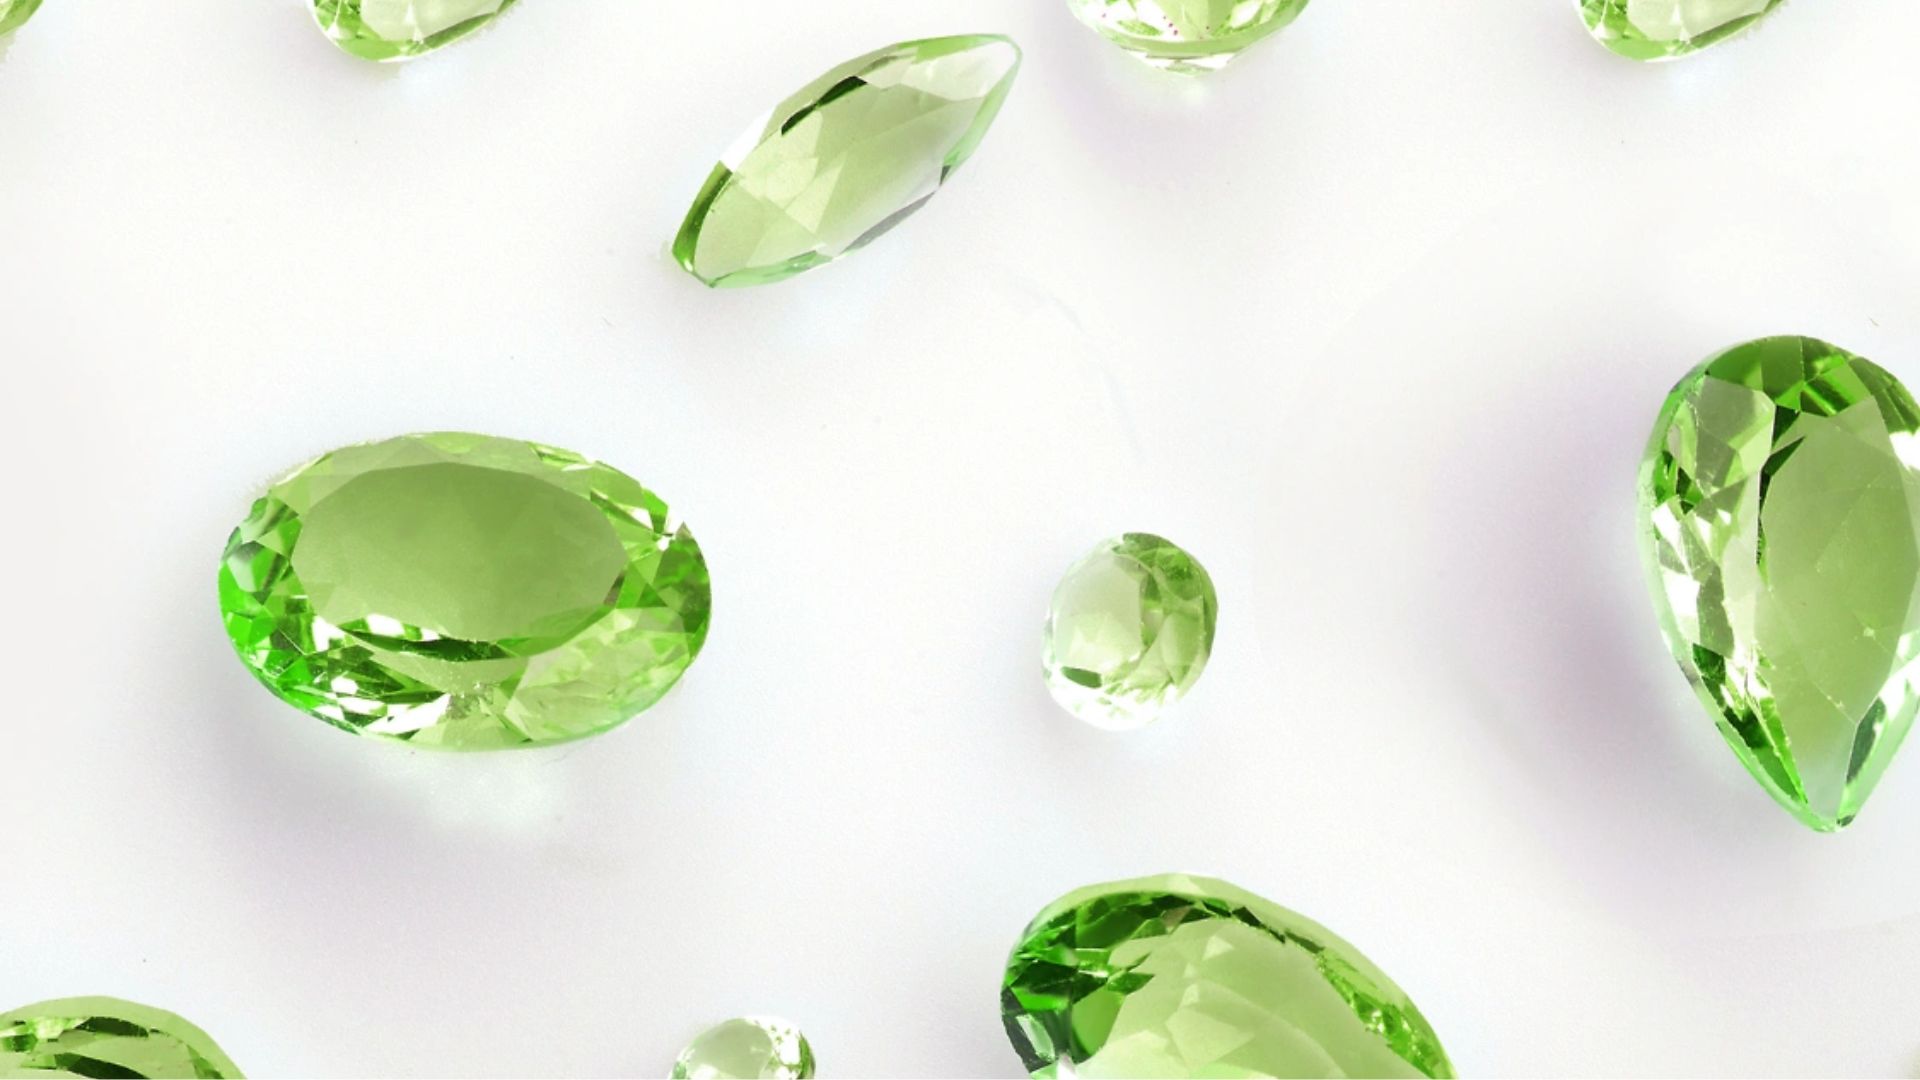 What Is The Birthstone For August?